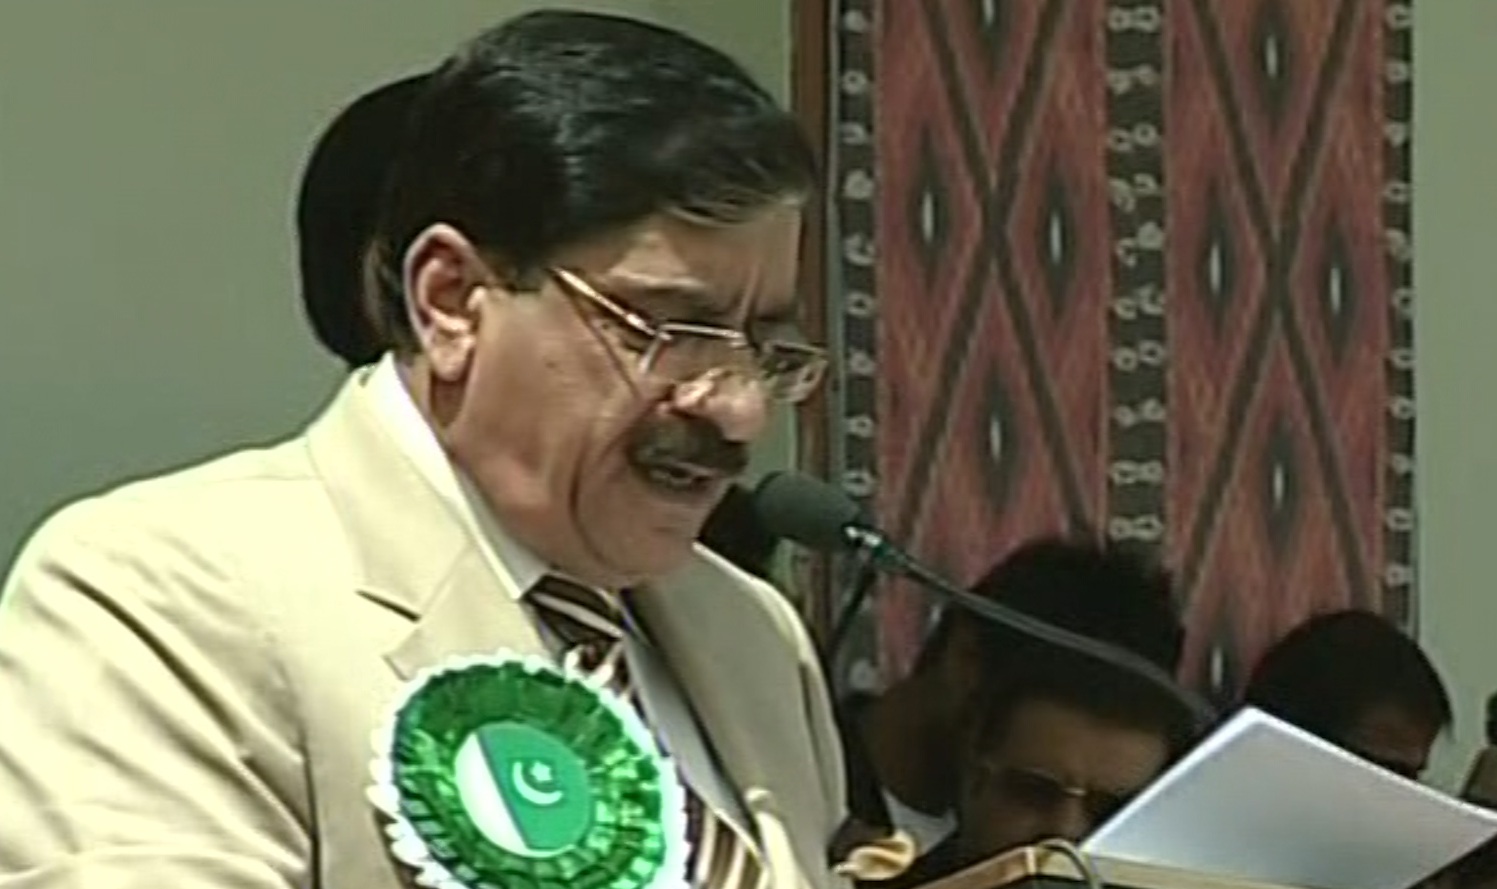 People of Baluchistan played important role in improving condition: Lt Gen Nasir Janjua